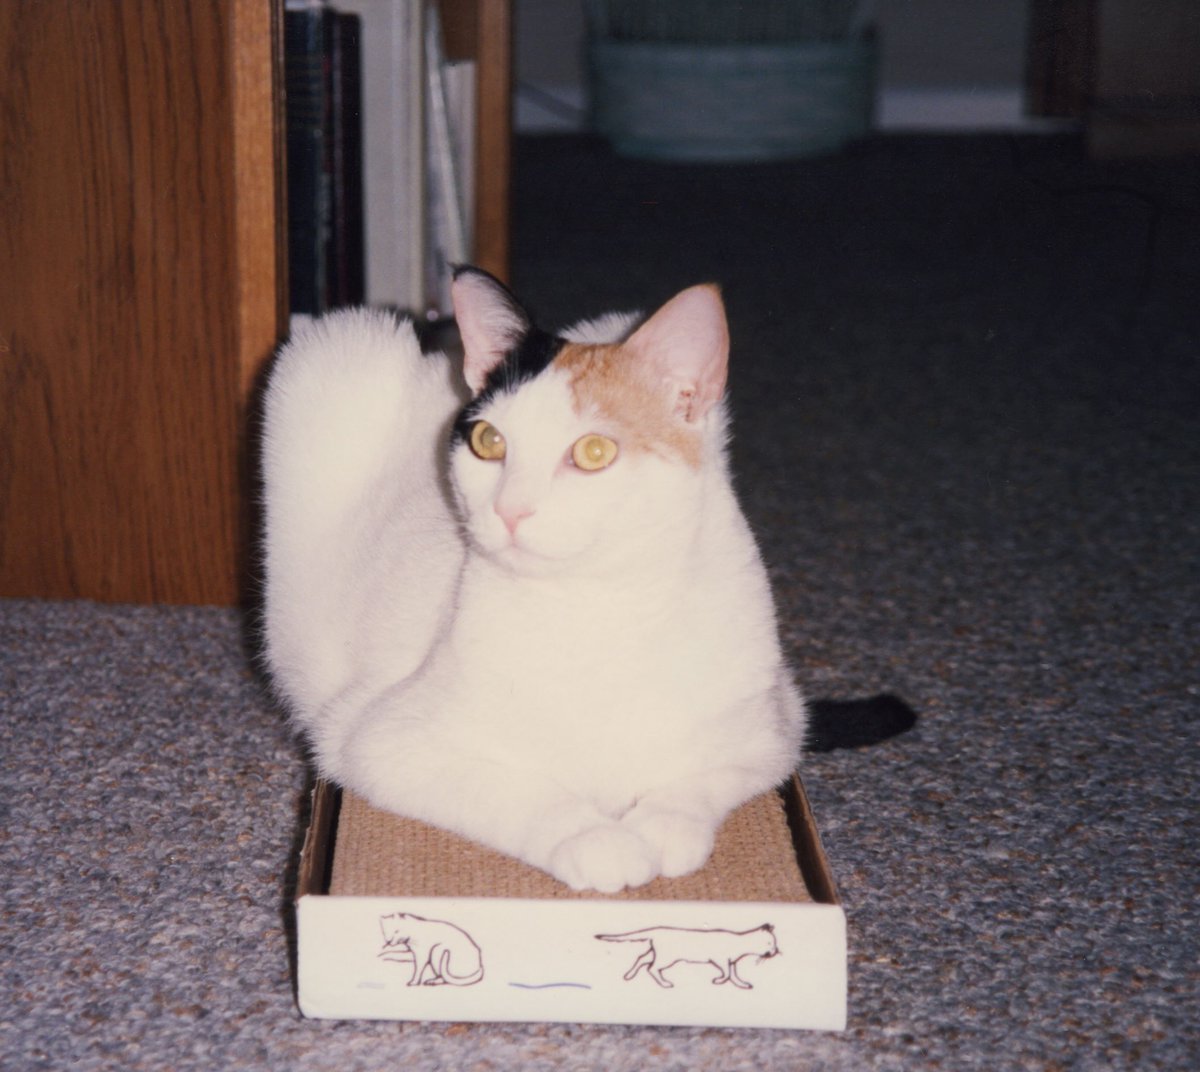  #Cali on a scratching pad with a "where I fits, I sits" expression.   #CaliMemories  #CaturdayEve